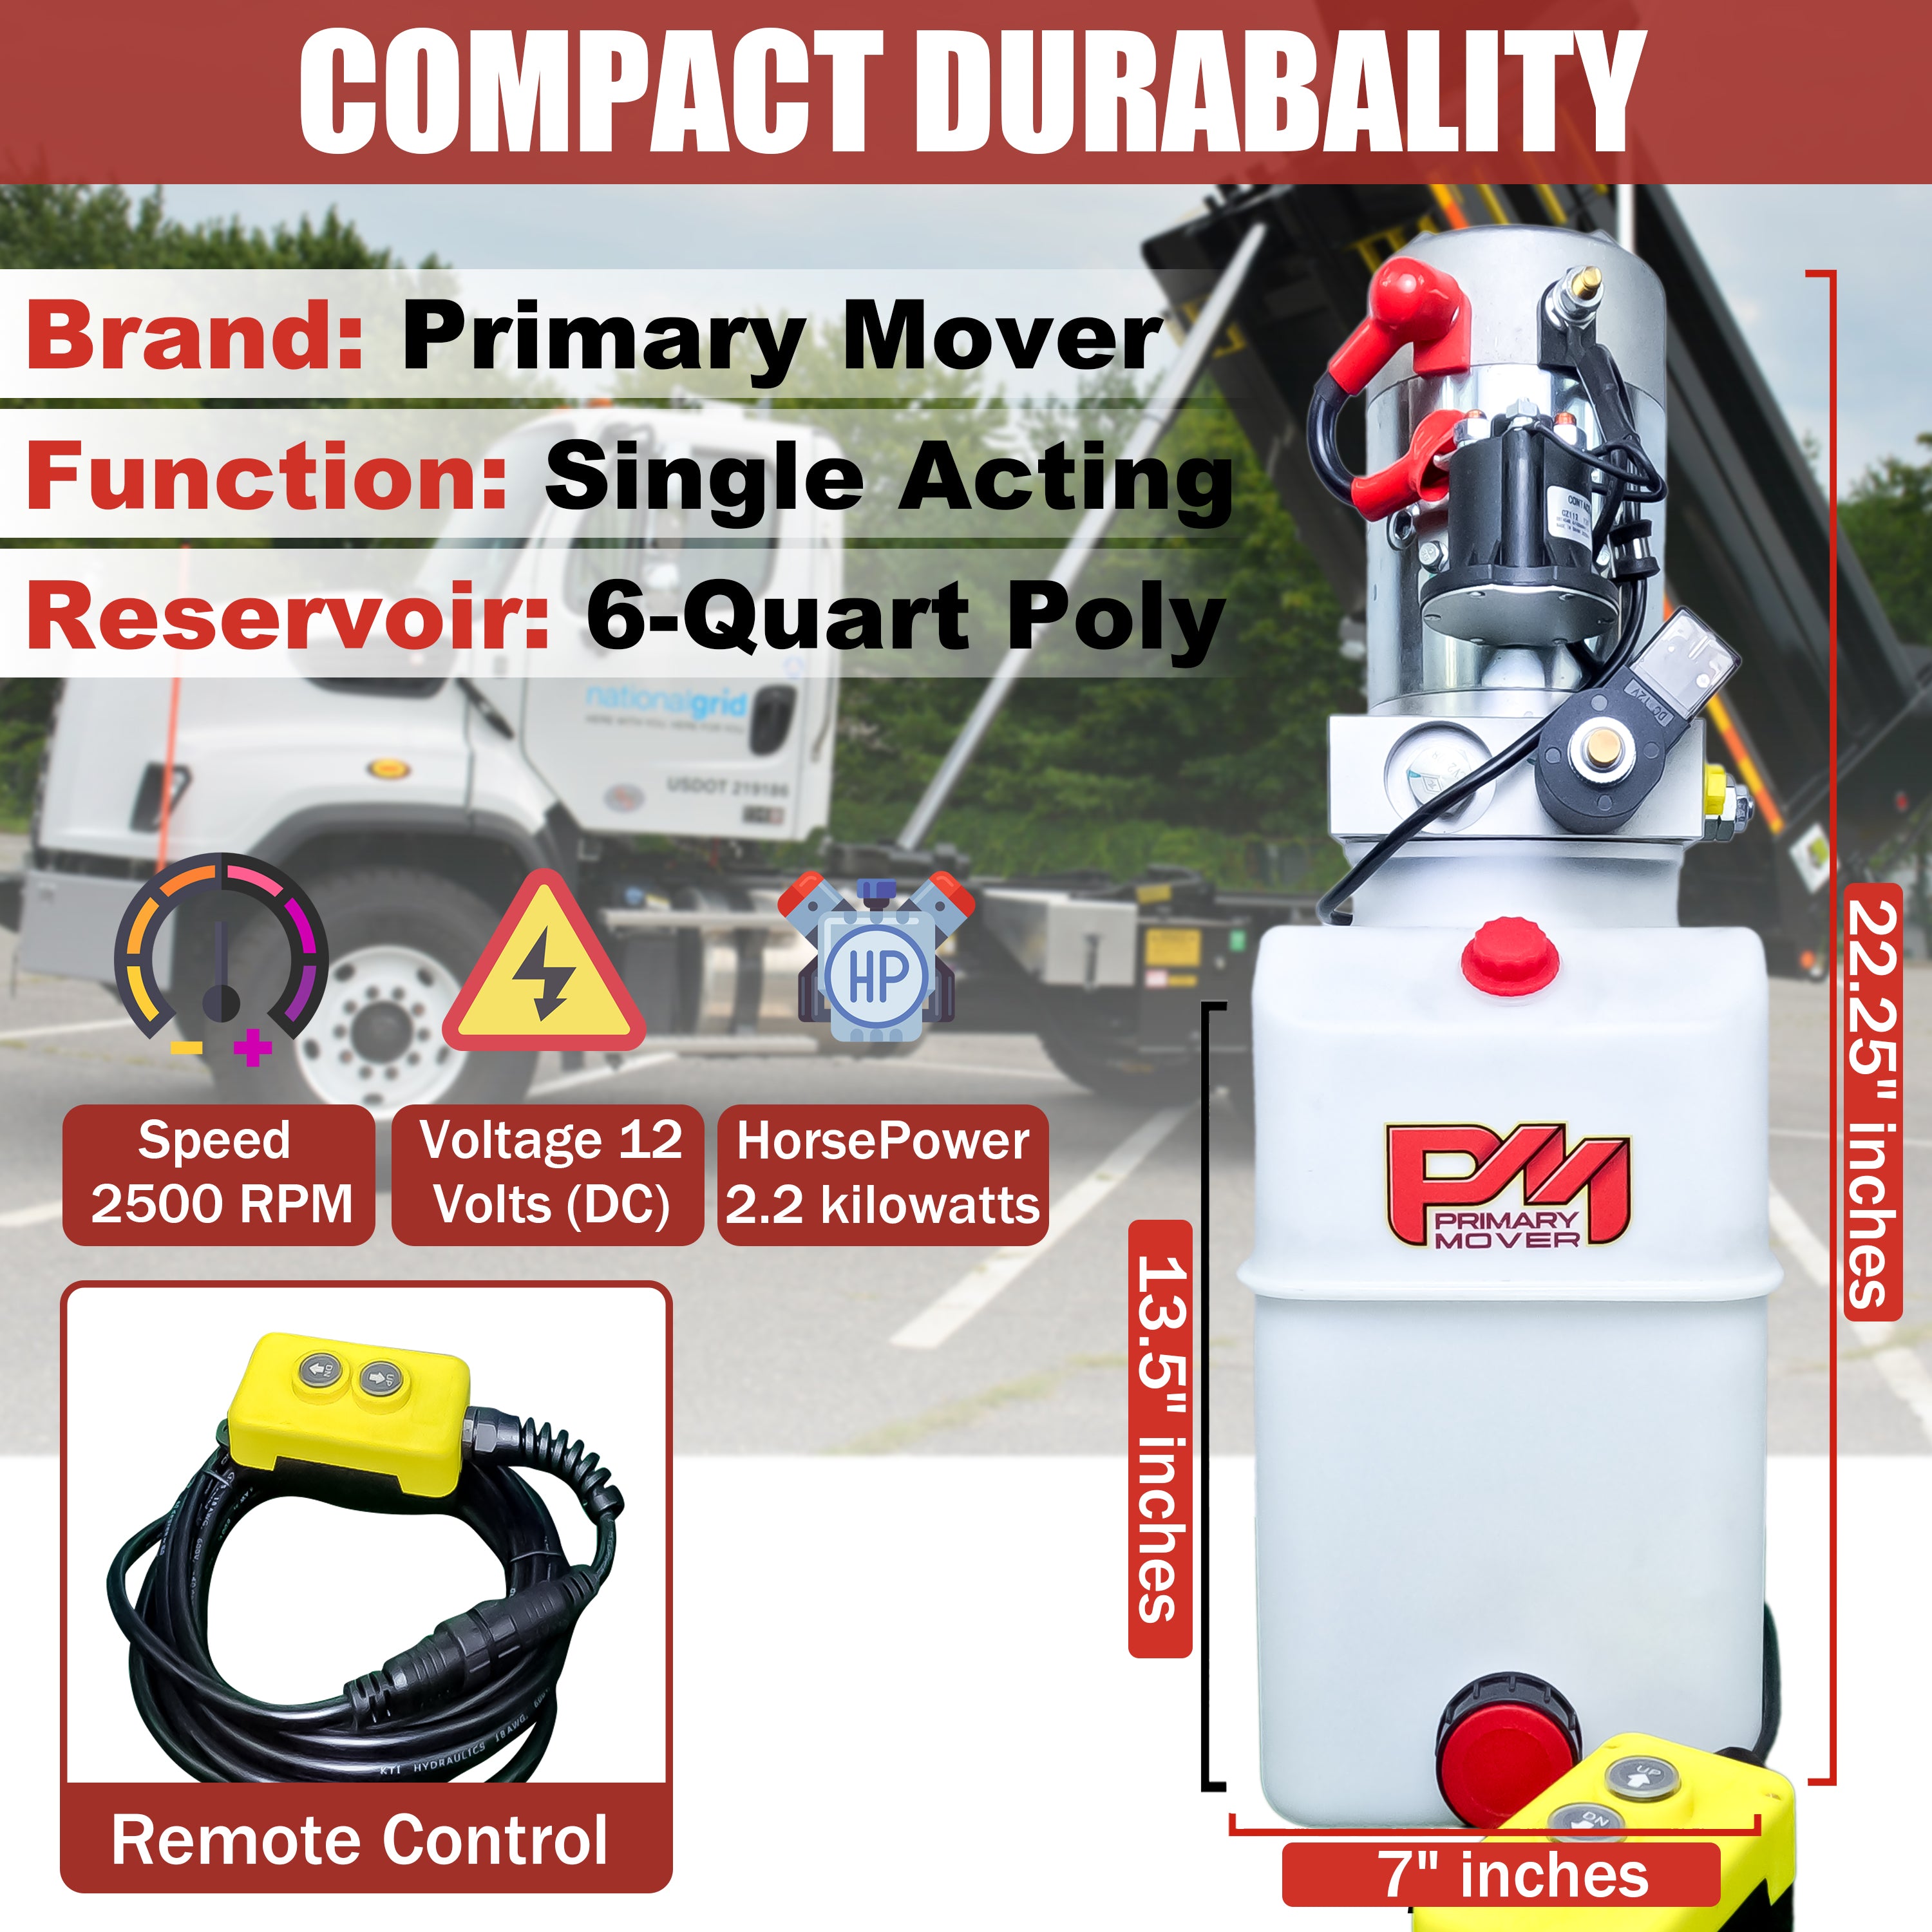 Primary Mover 12V Single-Acting Hydraulic Pump with Poly Reservoir, optimized for dump bed systems. Features single-acting pump, 3200 PSI relief setting, 2.5 GPM flow, and 4-quart translucent tank.